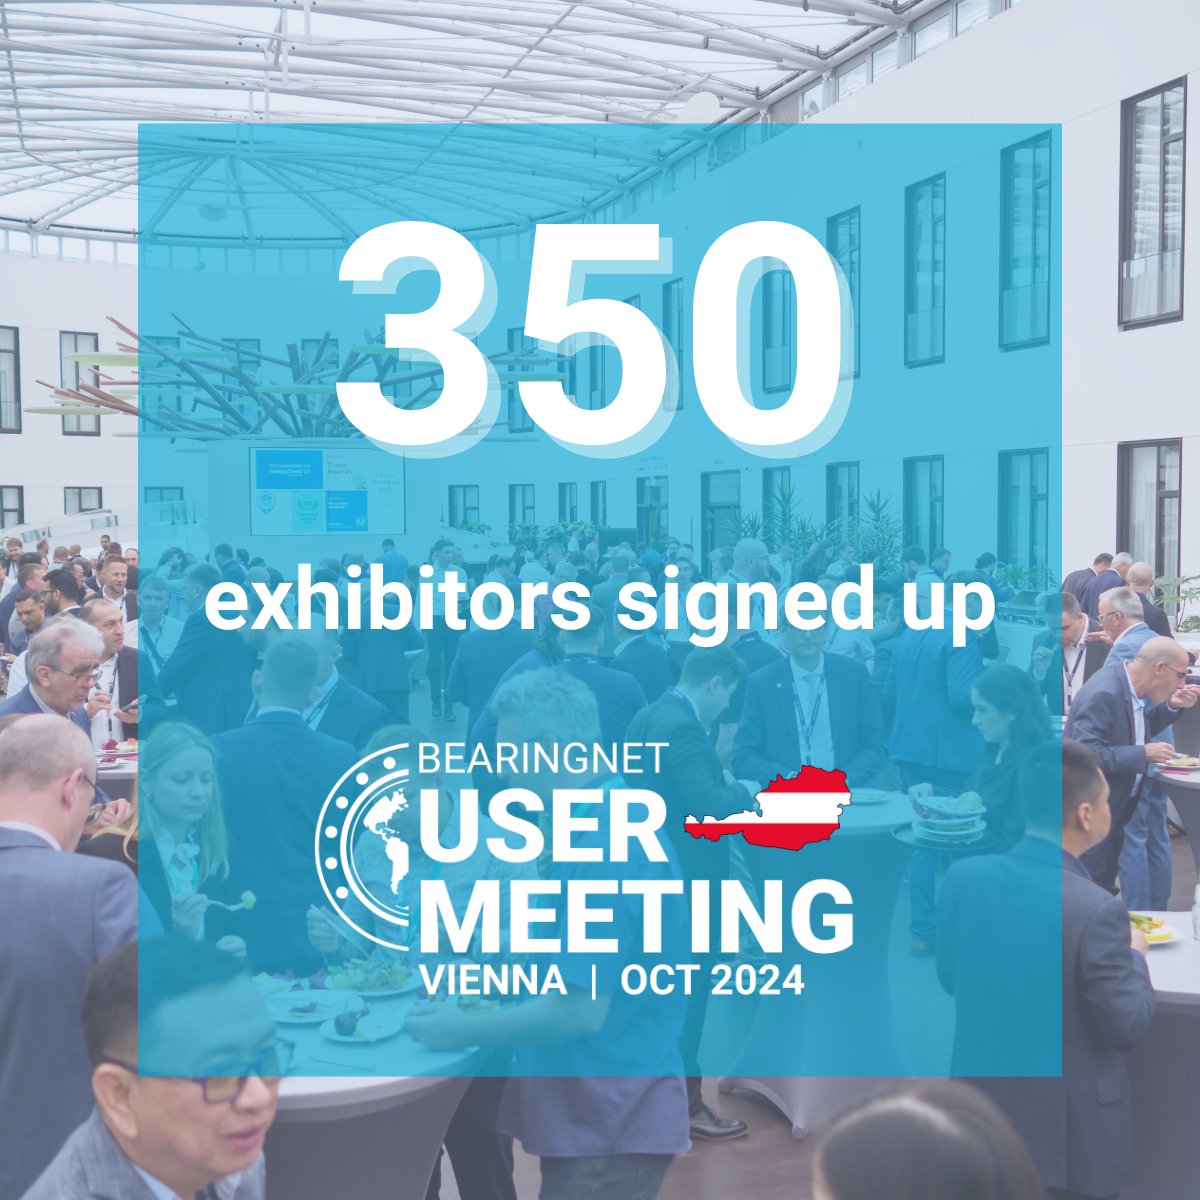 Just over six months remain until the Vienna User Meeting, and 350 exhibitors have already signed up! Register your interest today - bearingnet.net/Events Already registered? View our sponsorship opportunities - c.bearingnet.net/.../ViennaSpon… #UMVIENNA24 #usermeeting #events